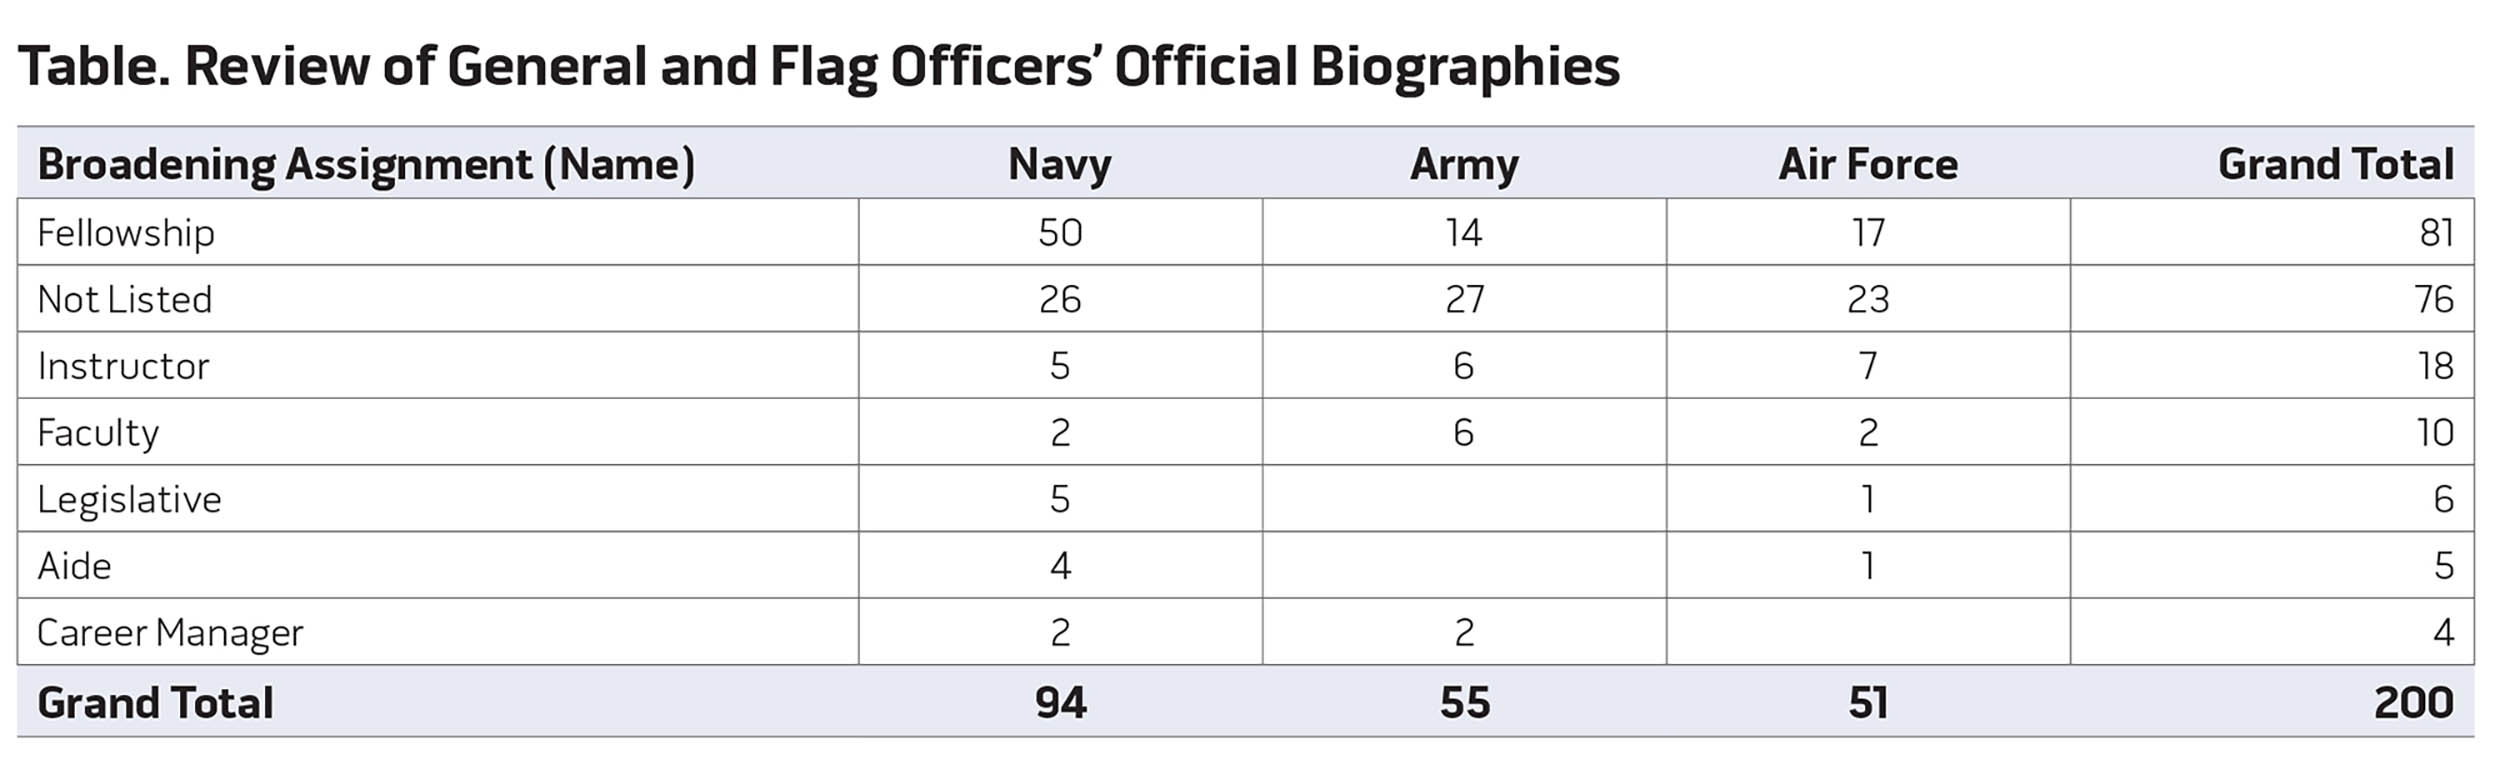 Table. Review of General and Flag Officers’ Official Biographies